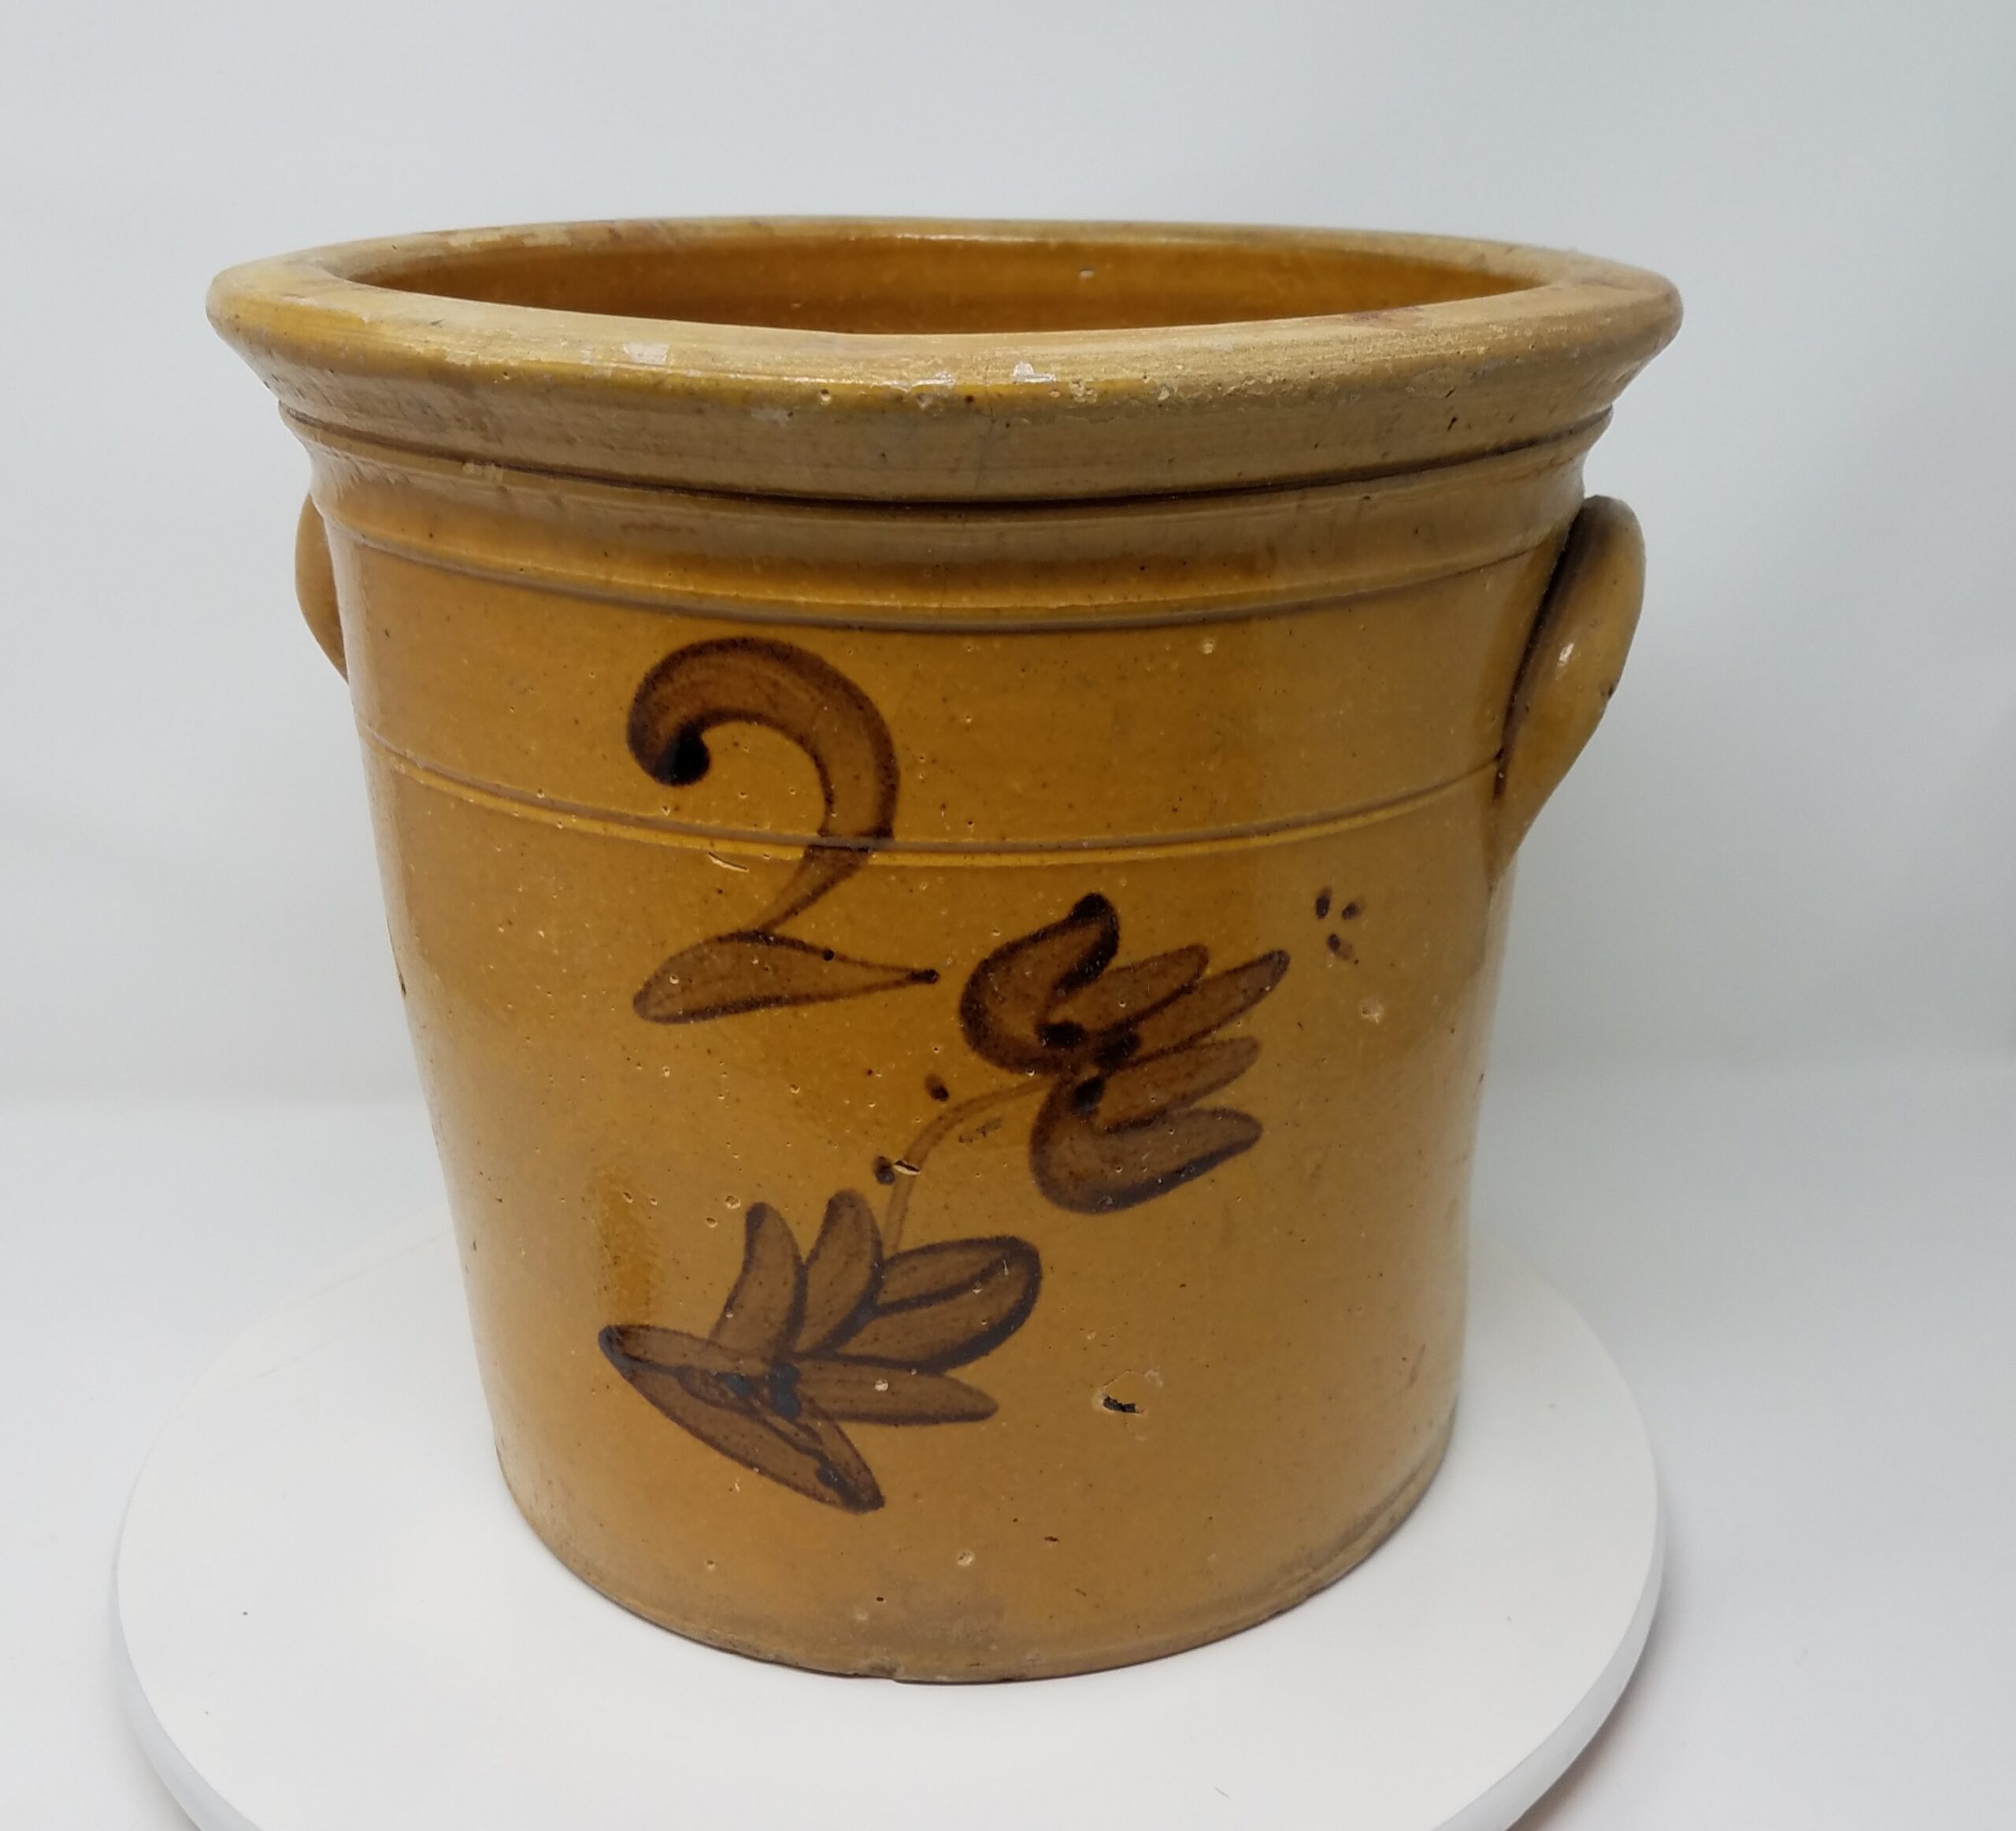 Whitewater two-gallon crock with ear handles, manganese decoration and a single inscribed line. Note the prominent and highly shaped rim that is typical for Whitewater crocks and cream pots.